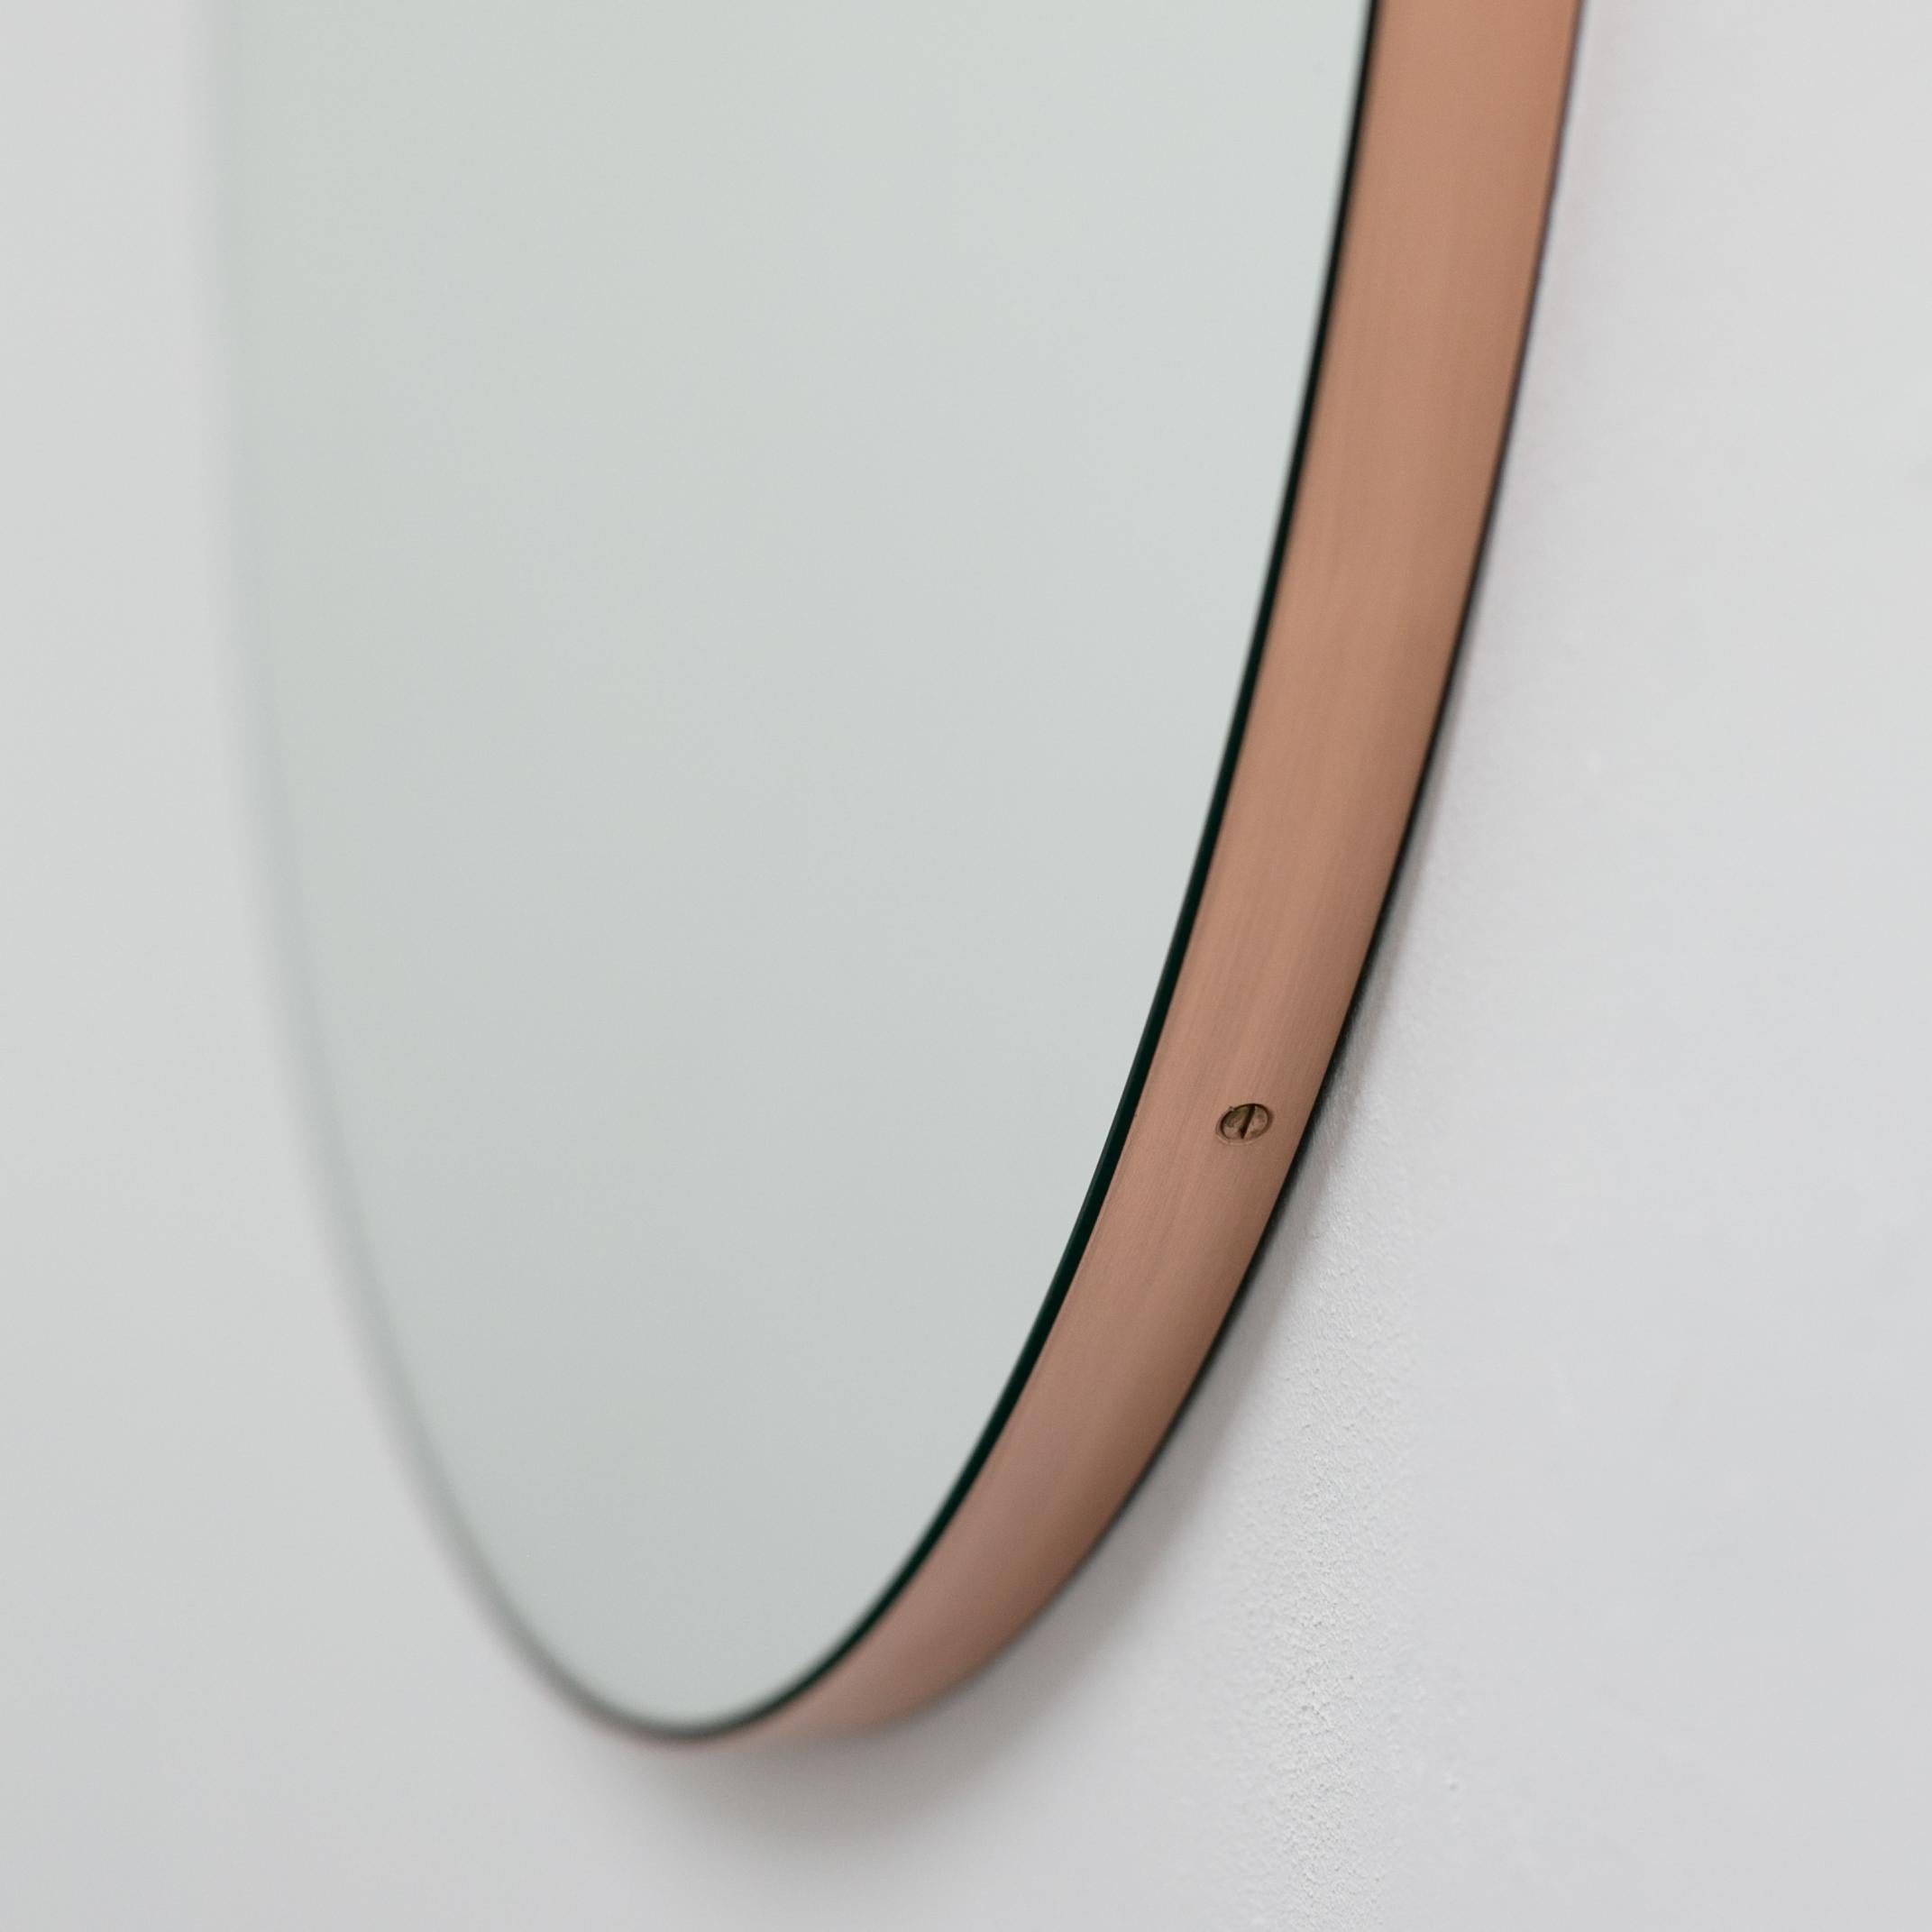 In Stock Orbis Round Handcrafted Mirror with Copper Frame, Medium In New Condition For Sale In London, GB